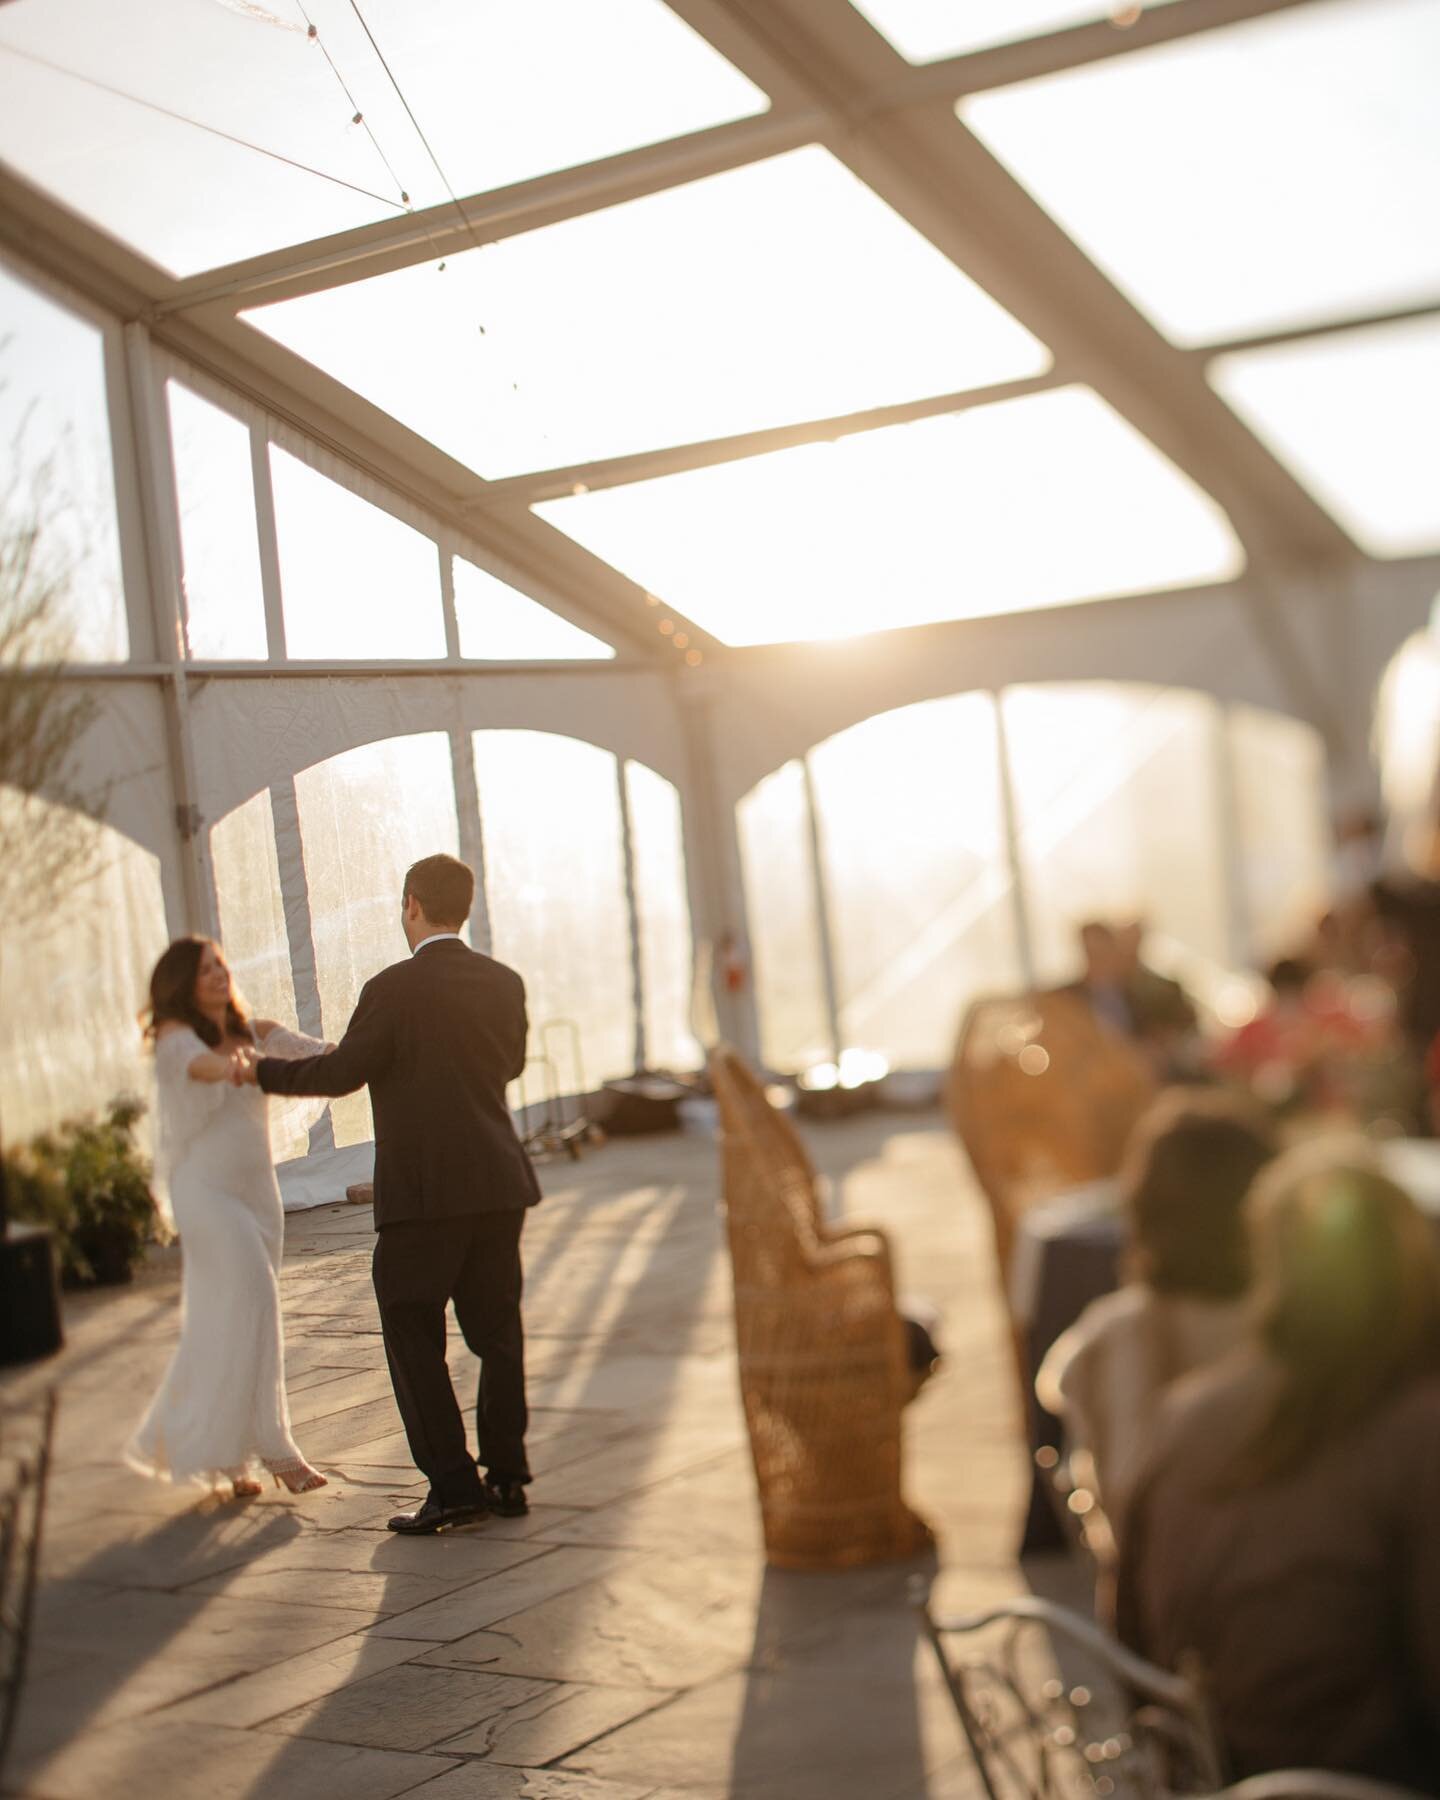 Their first dance, and sunset at @grelenweddings